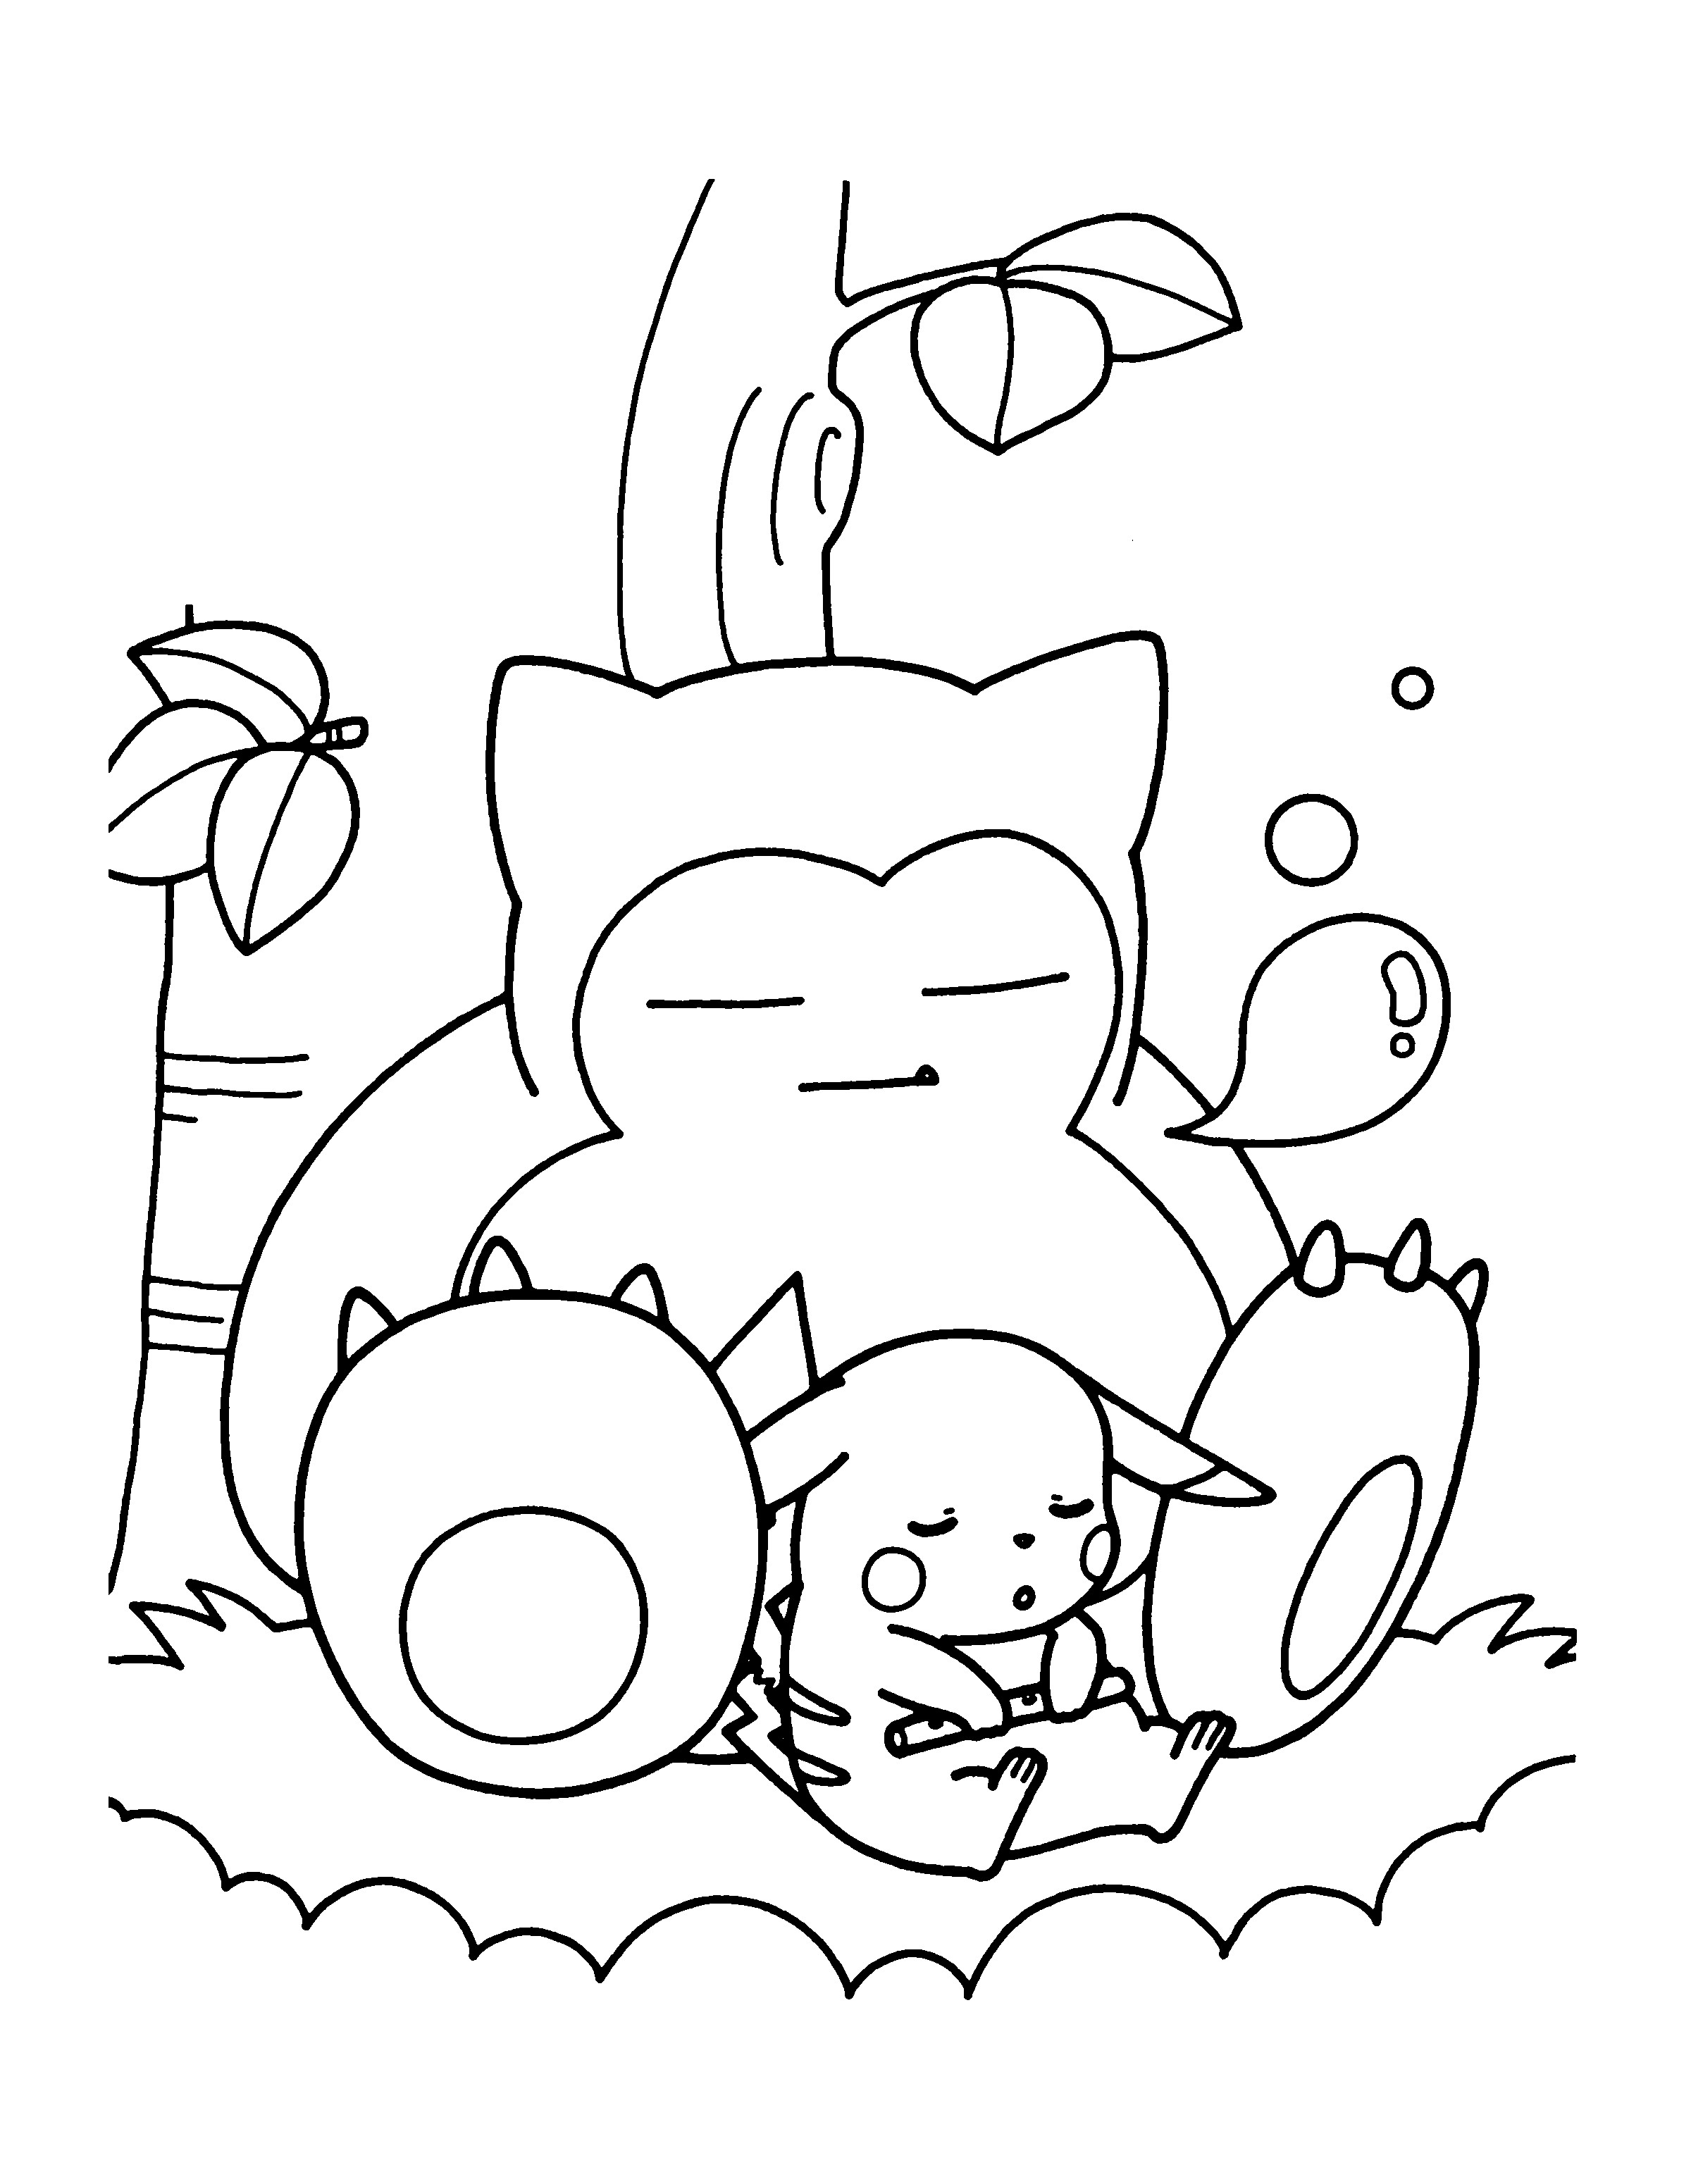 Pokemon Coloring Pages Snorlax Wallpaper Details - Pokemon Coloring Pages Snorlax , HD Wallpaper & Backgrounds